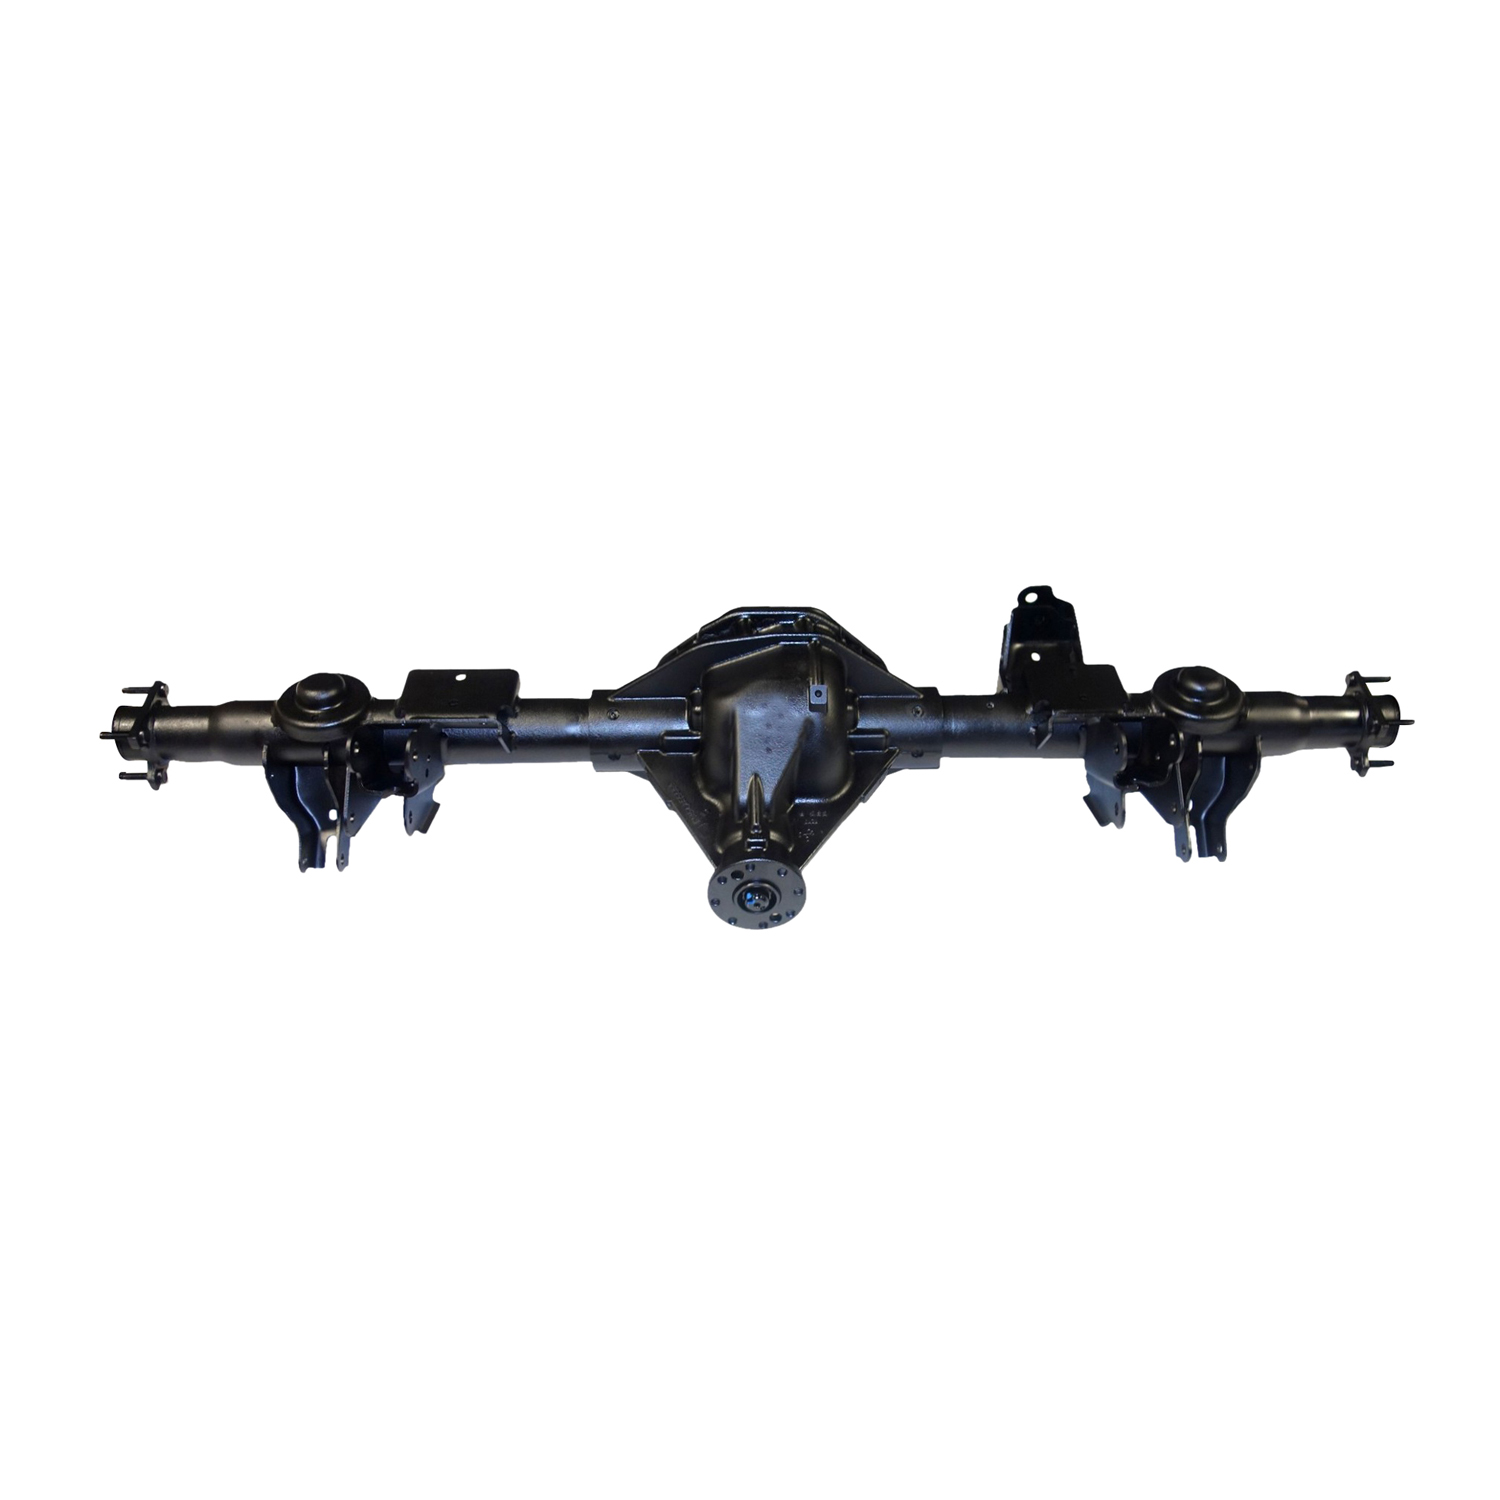 Reman Axle Assembly Chrysler 9.25ZF 2011 Dodge Ram 1500 4.11 Ratio, 2wd